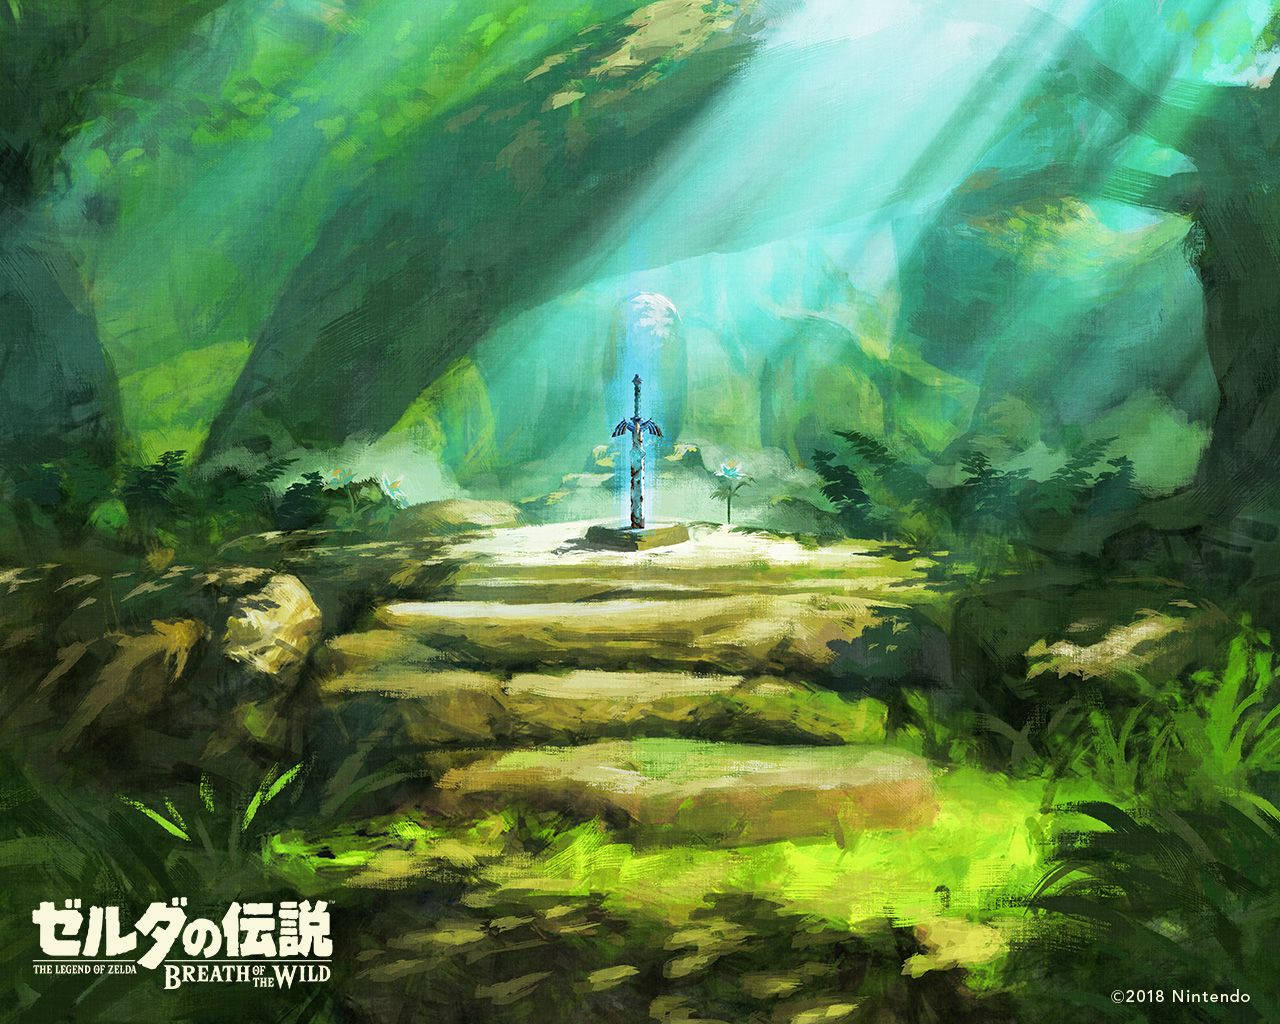 Step Inside A World Of Adventure And Exploration With The Master Sword In The Breath Of The Wild Wallpaper